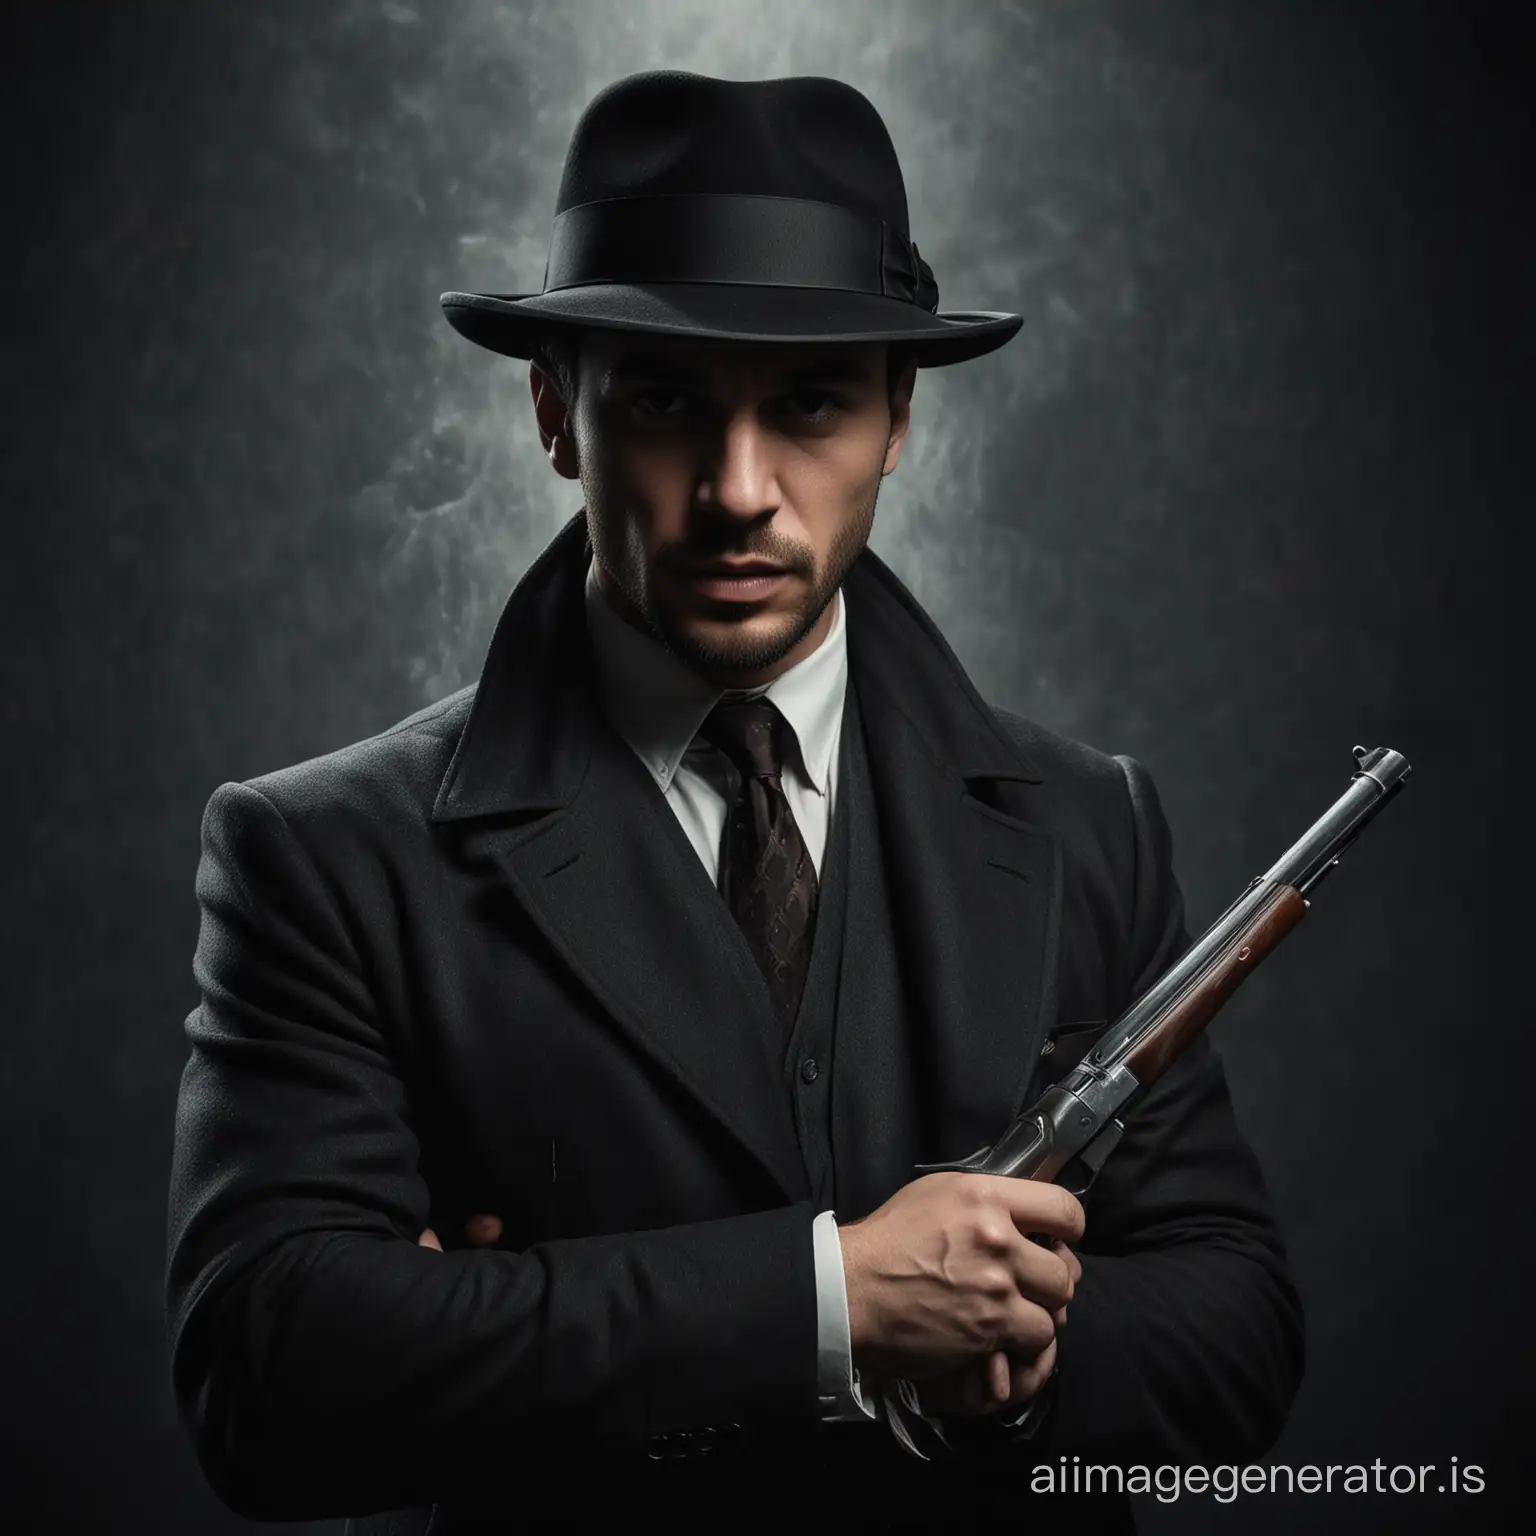 Mafia one man in a hat with a weapon city man brunet on a dark background time 1930 year